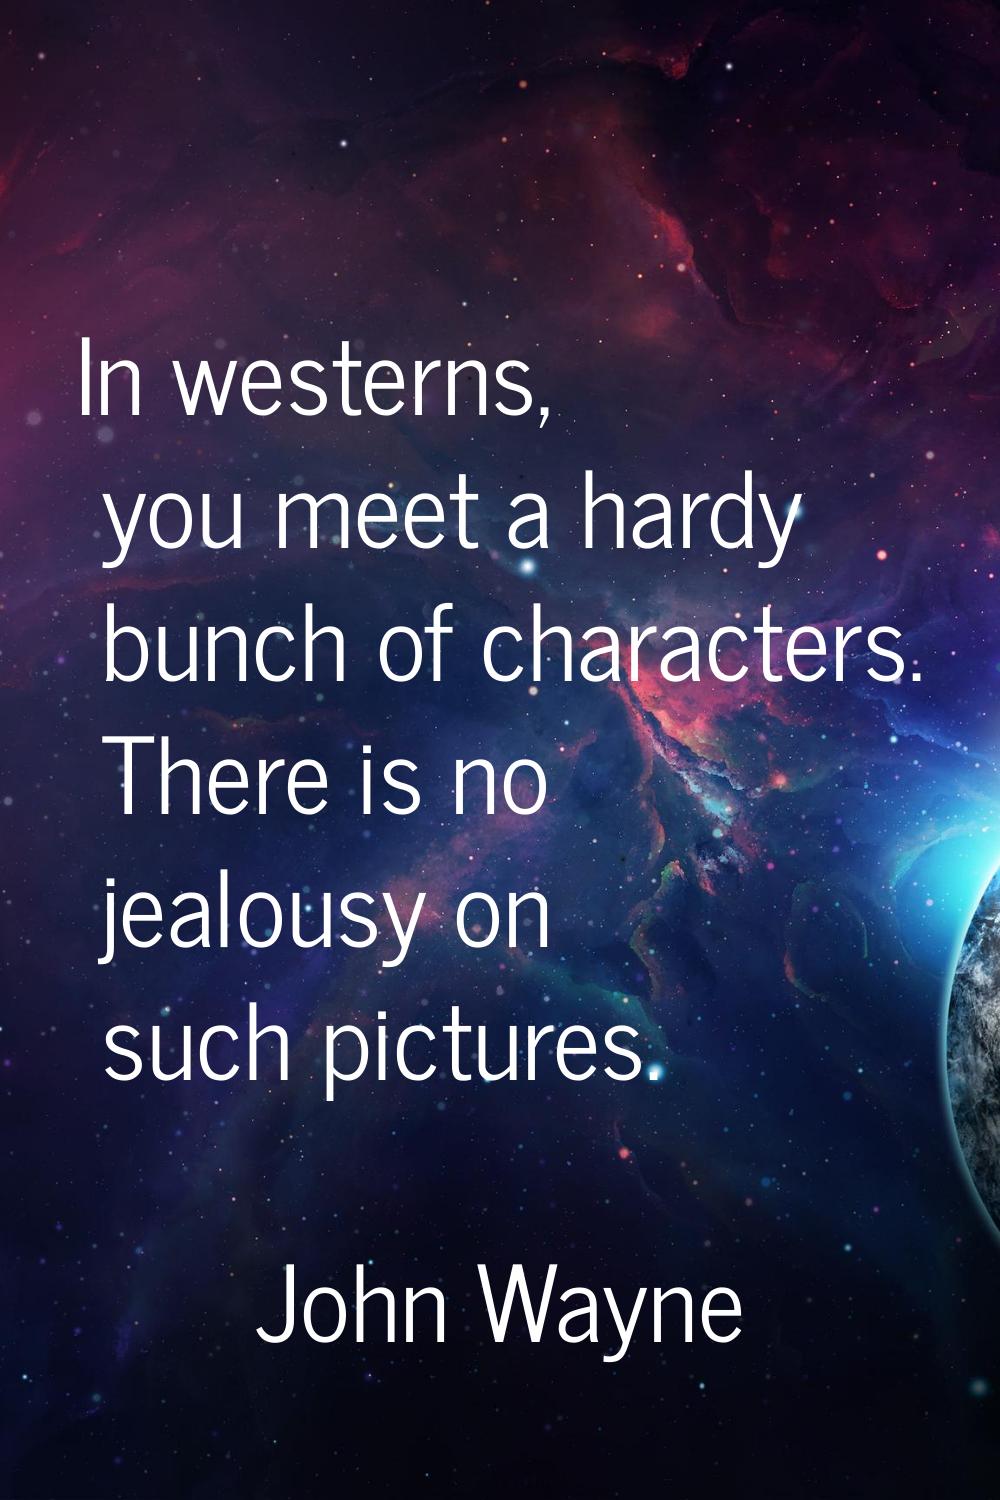 In westerns, you meet a hardy bunch of characters. There is no jealousy on such pictures.